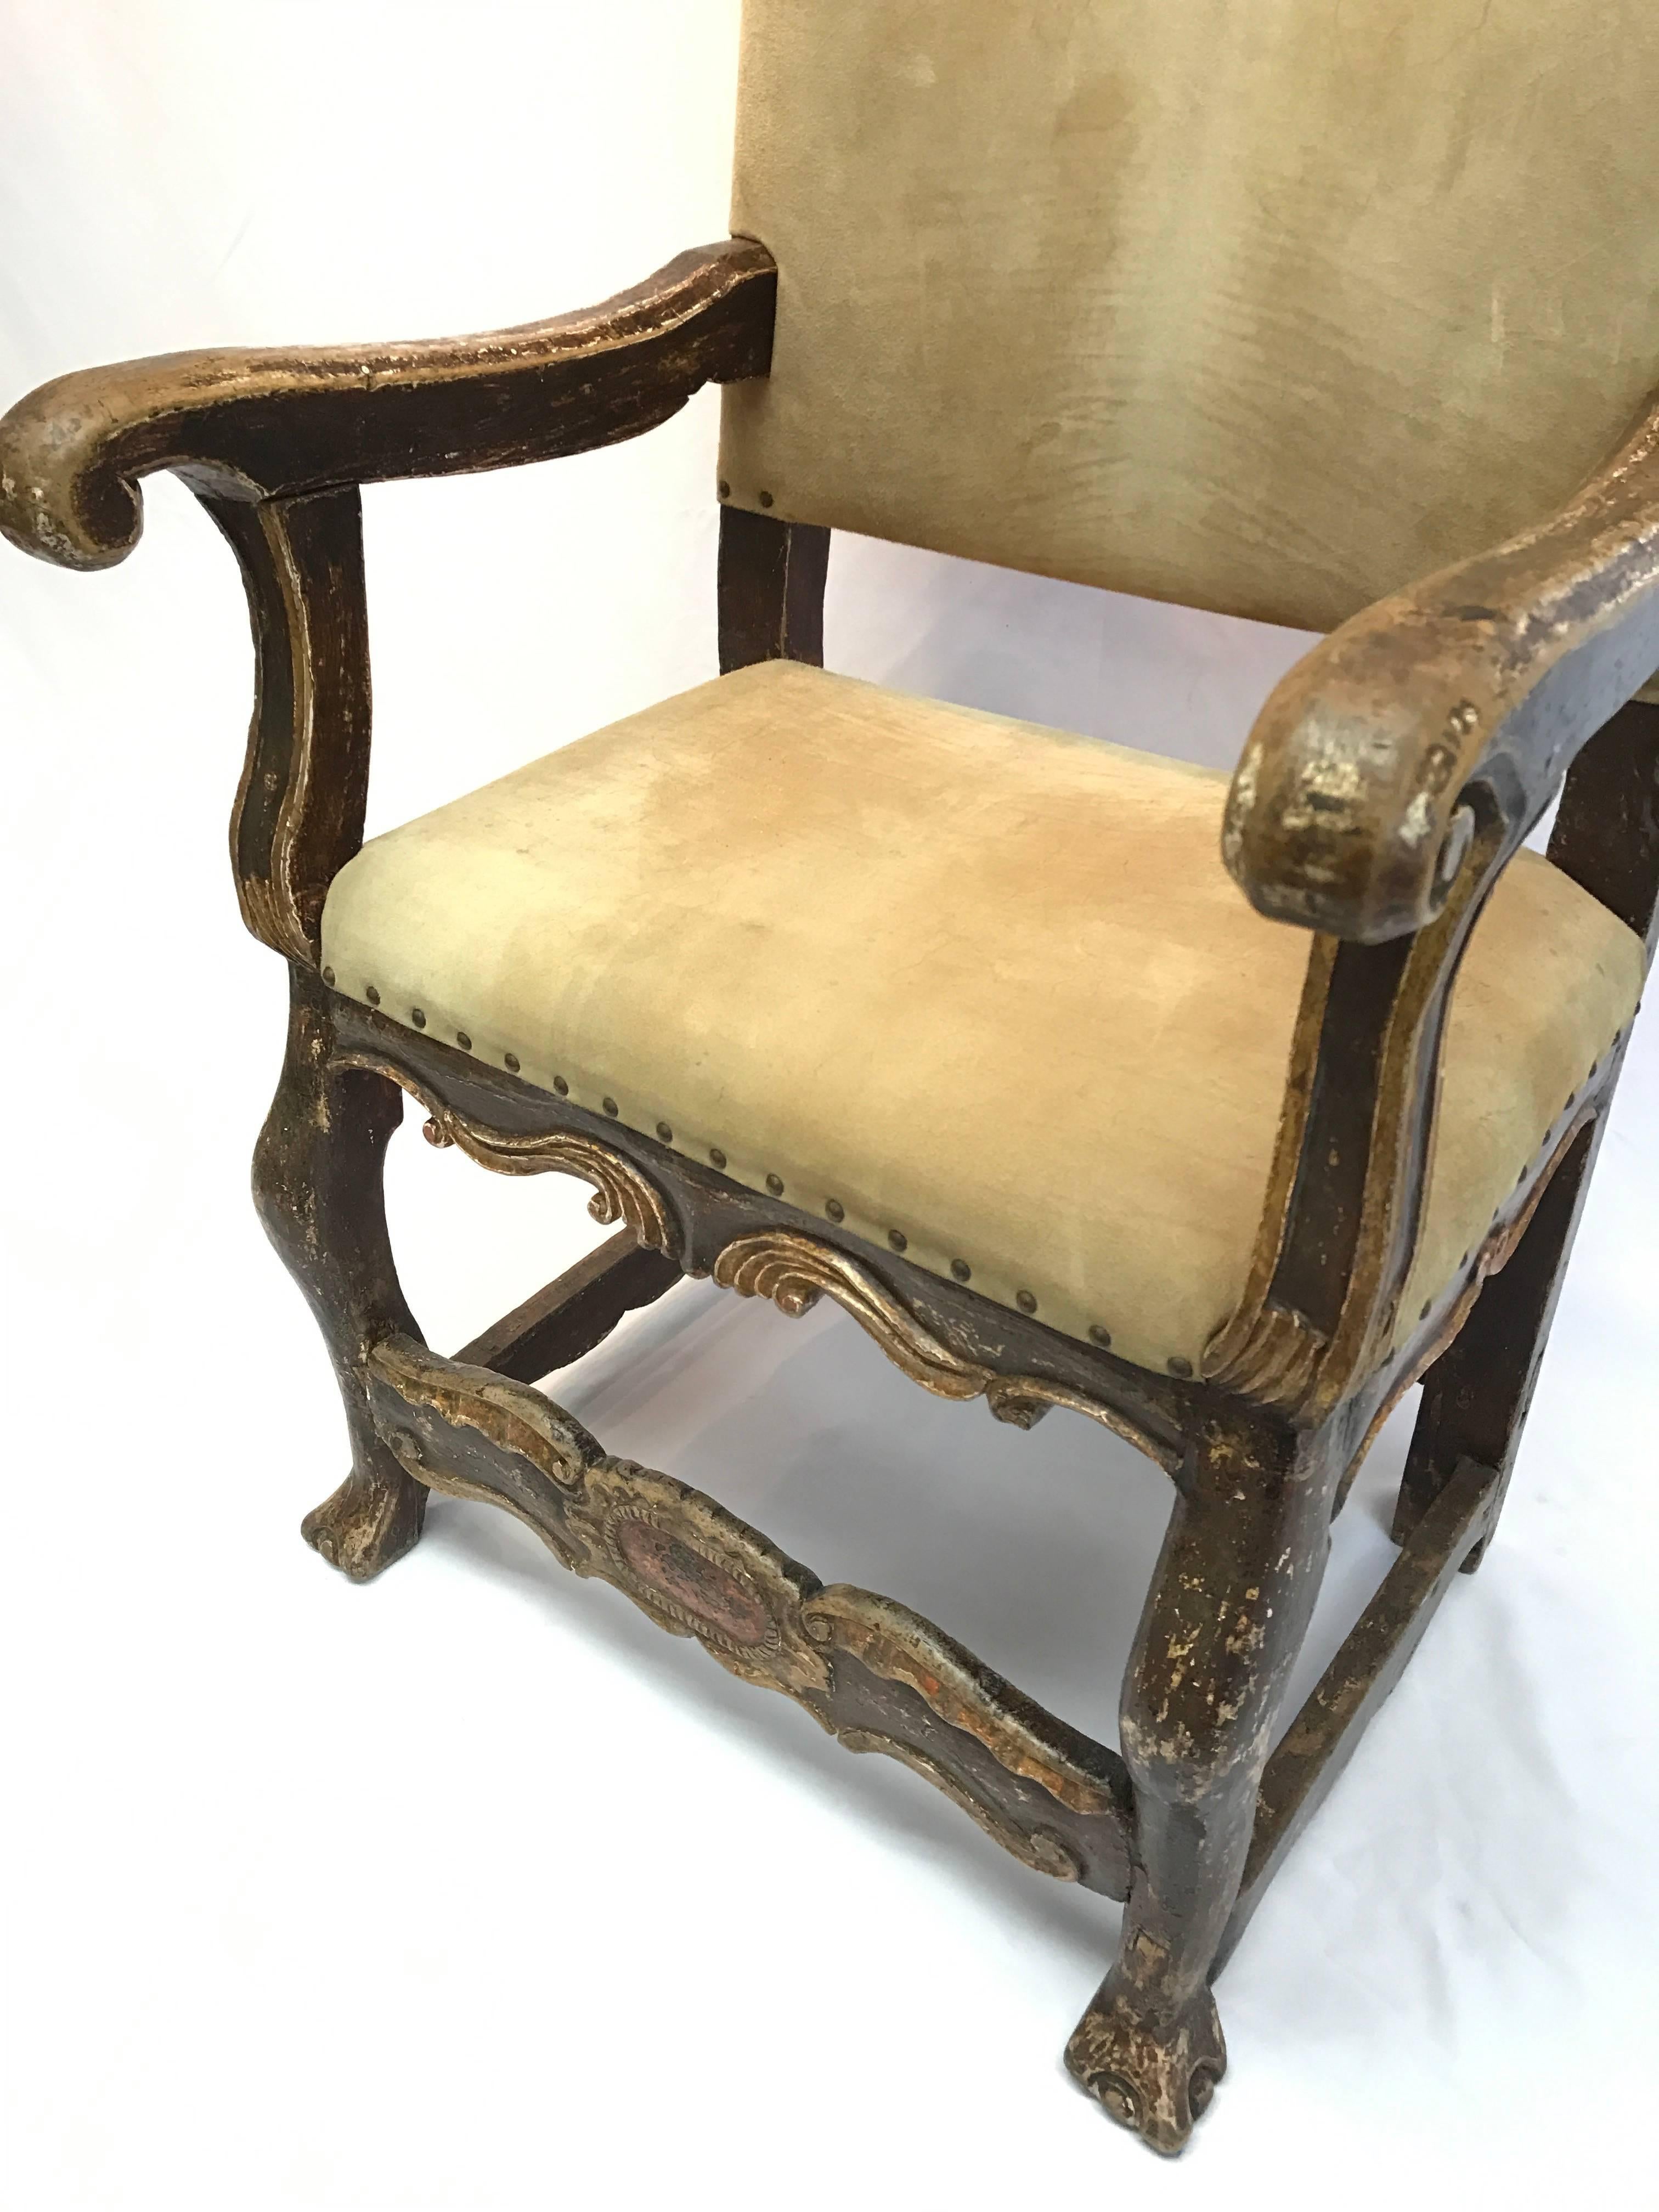 Spanish Colonial 18th Century Peruvian Gold Polychrome Chair For Sale